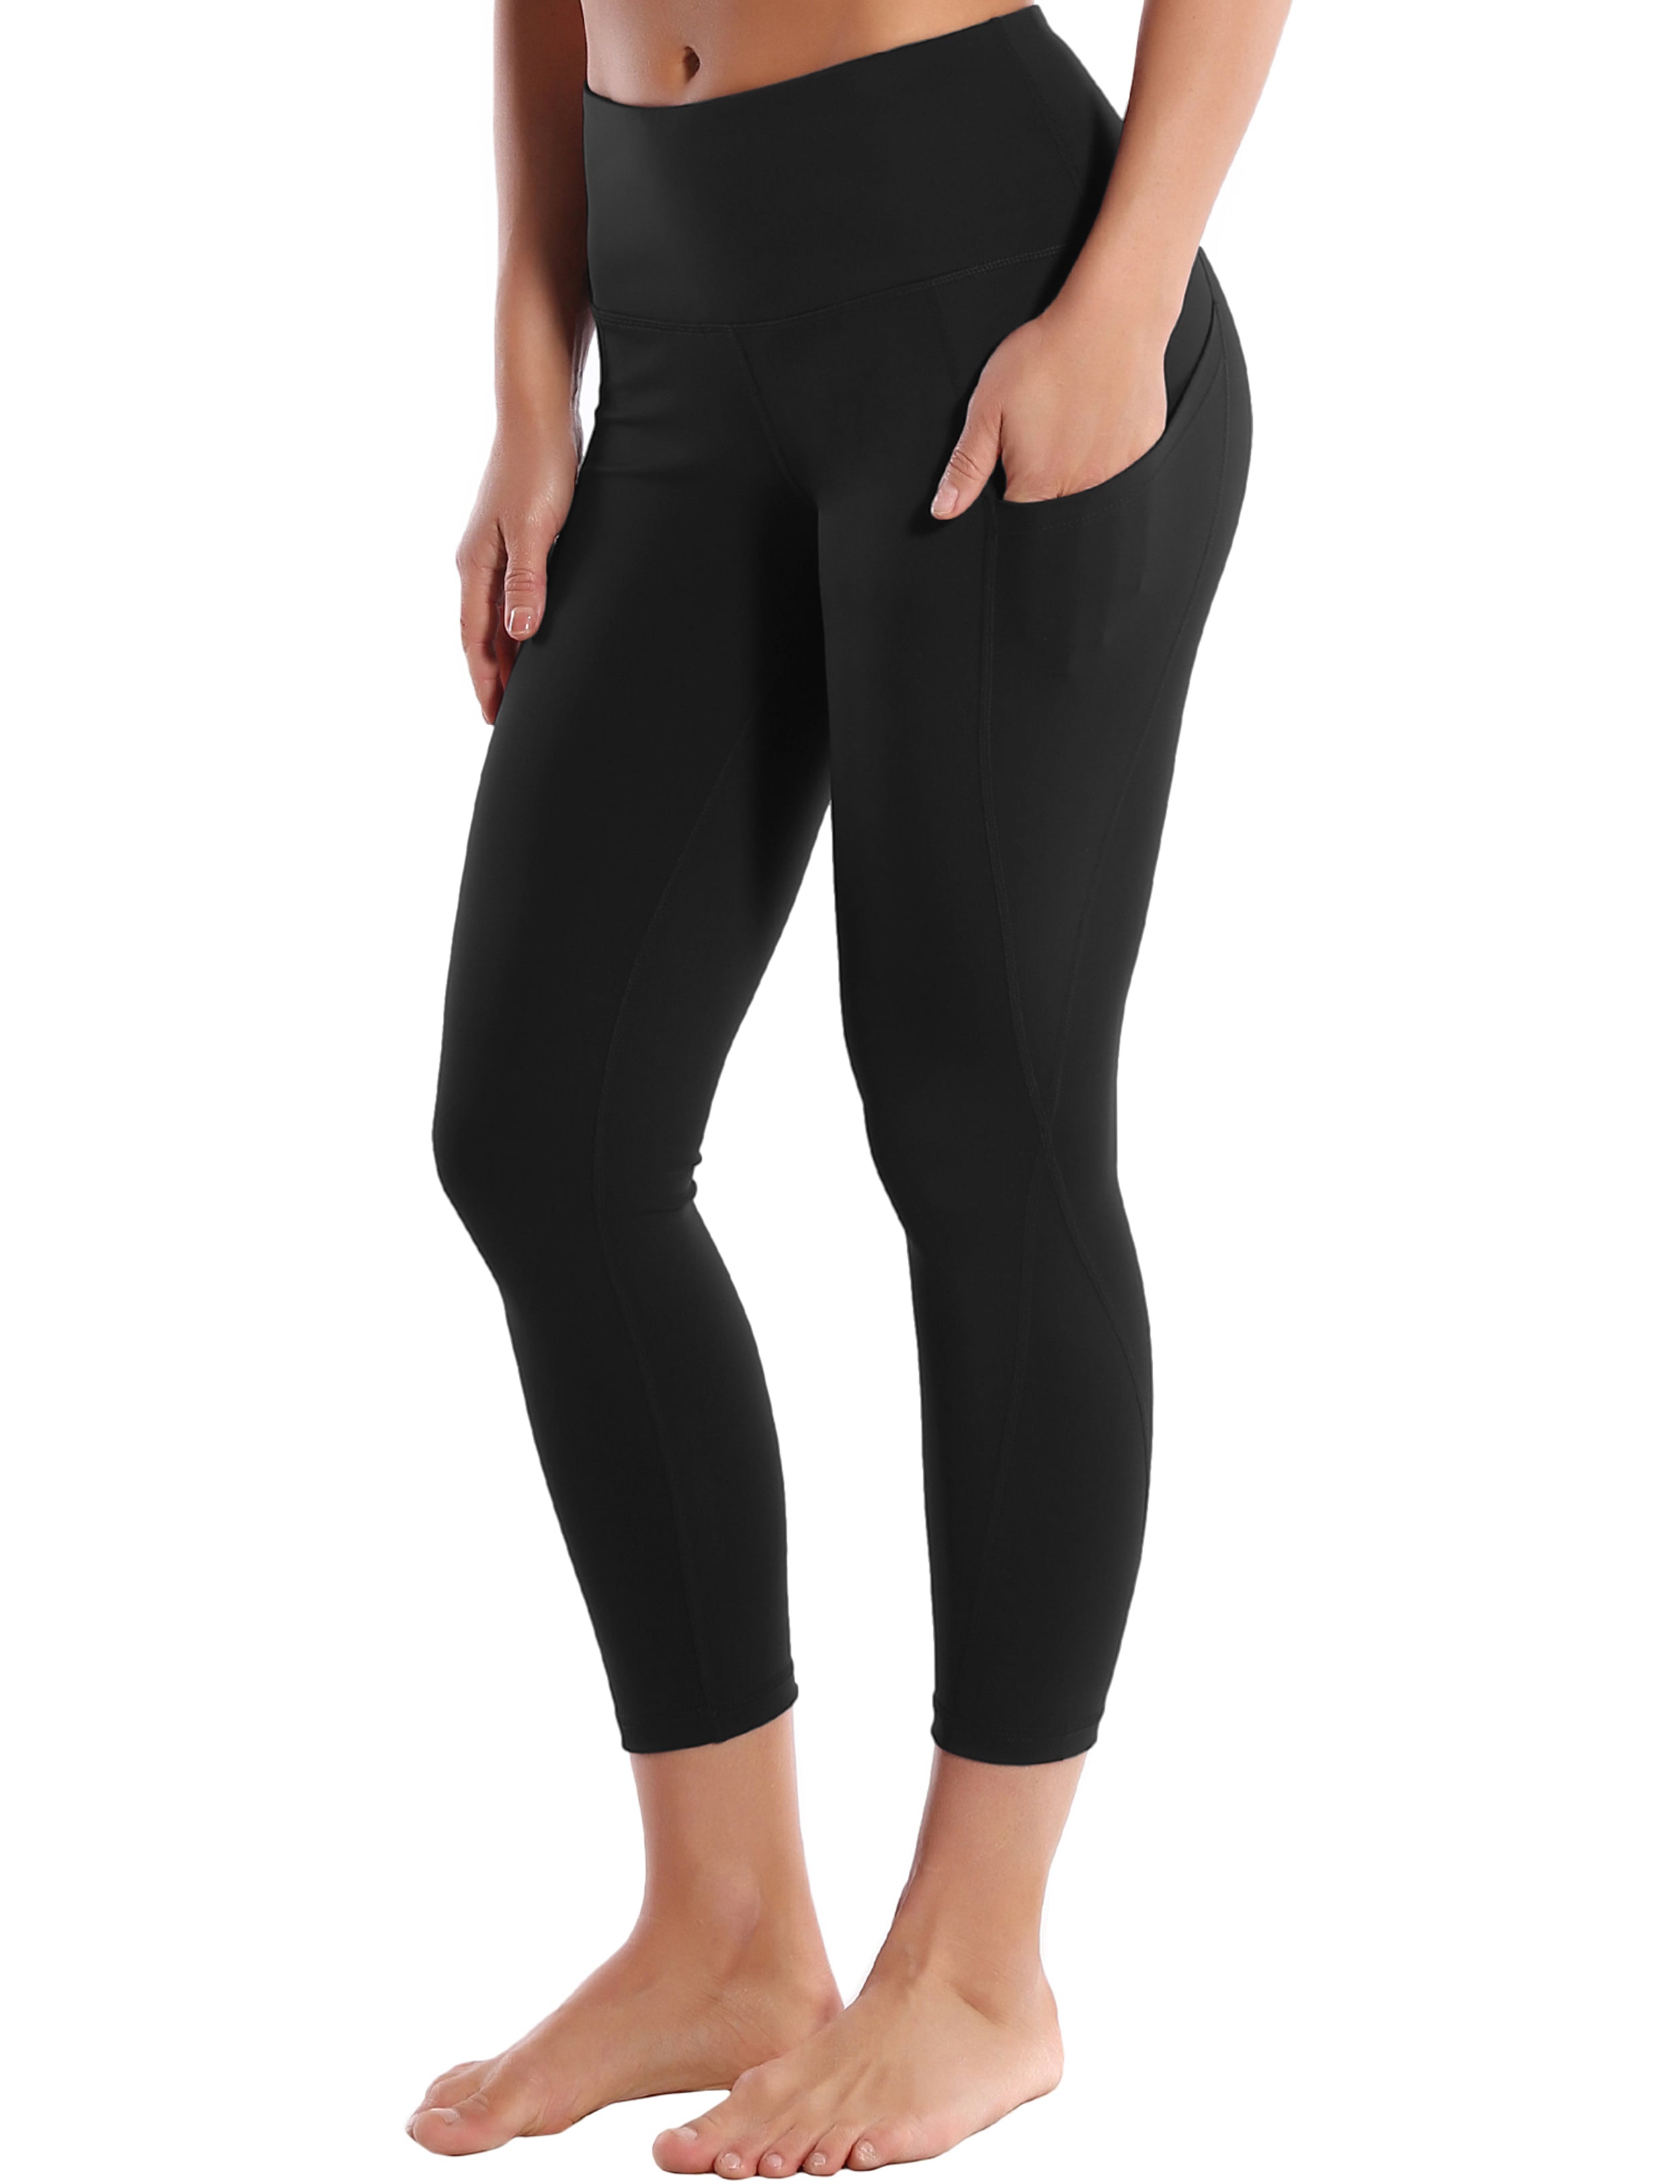 22" High Waist Side Pockets Capris black 75%Nylon/25%Spandex Fabric doesn't attract lint easily 4-way stretch No see-through Moisture-wicking Tummy control Inner pocket